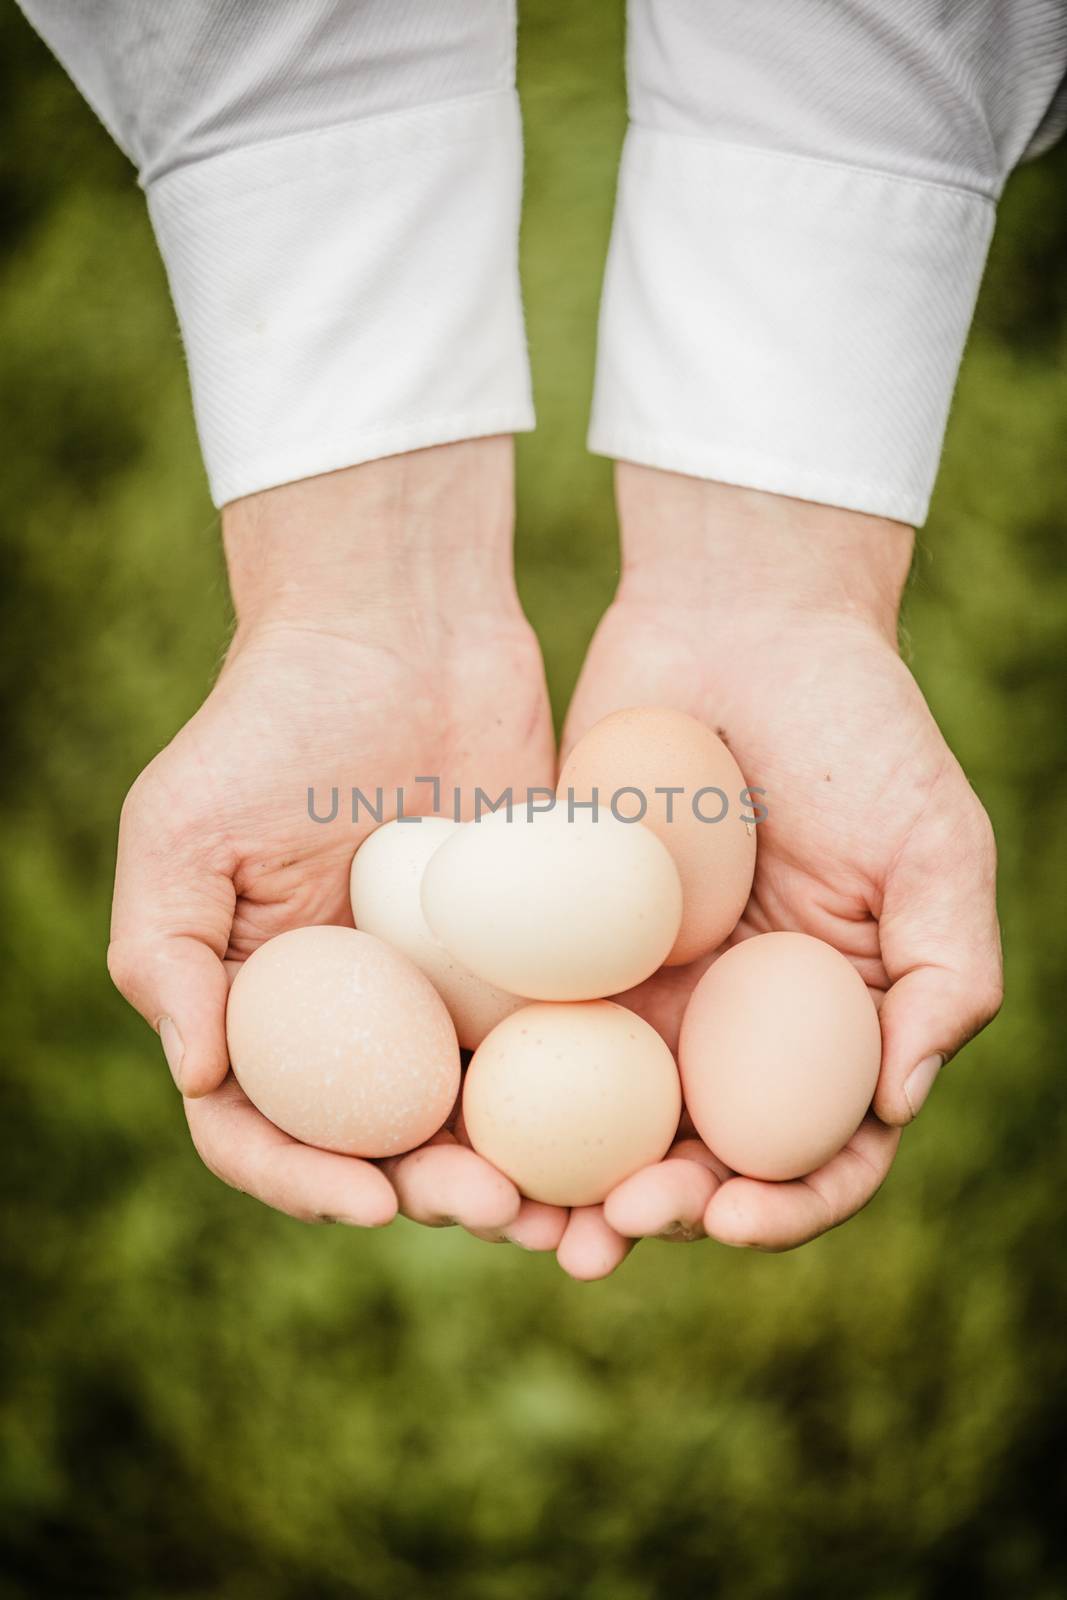 Eggs in Hands of a Farmer over Grass background